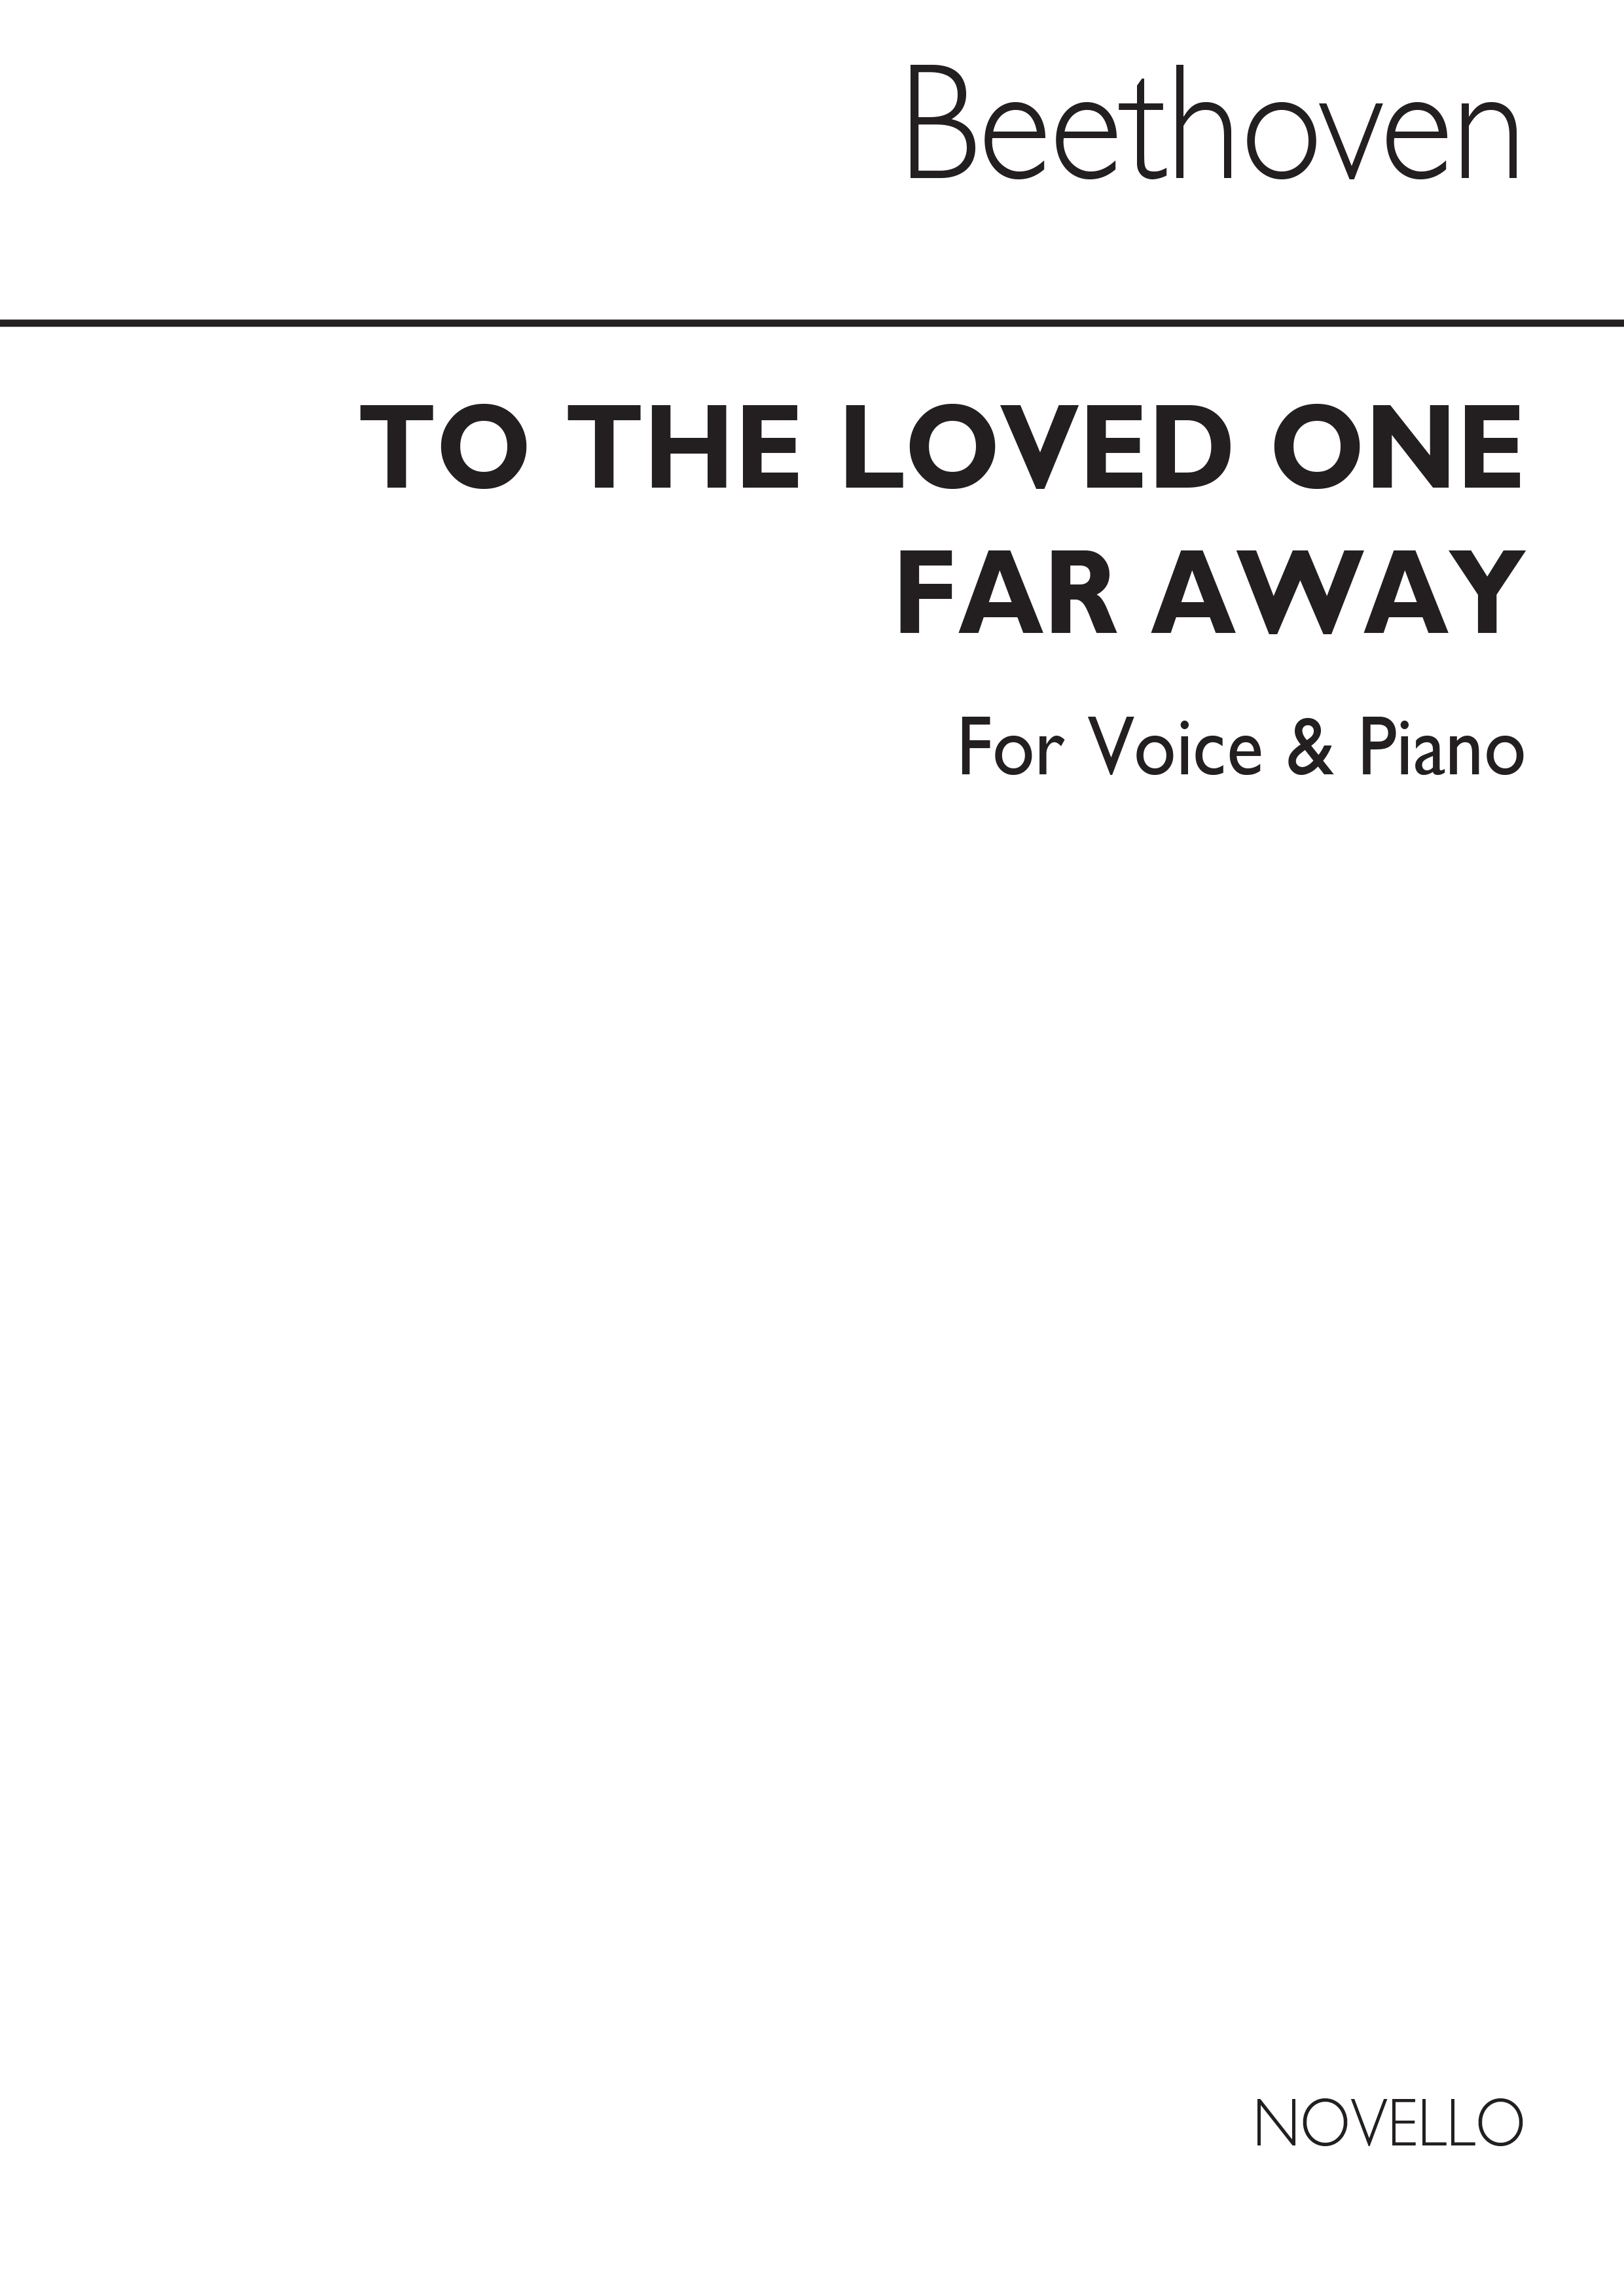 Ludwig van Beethoven: Beethoven To The Loved One Far Away (E/G): Voice: Vocal